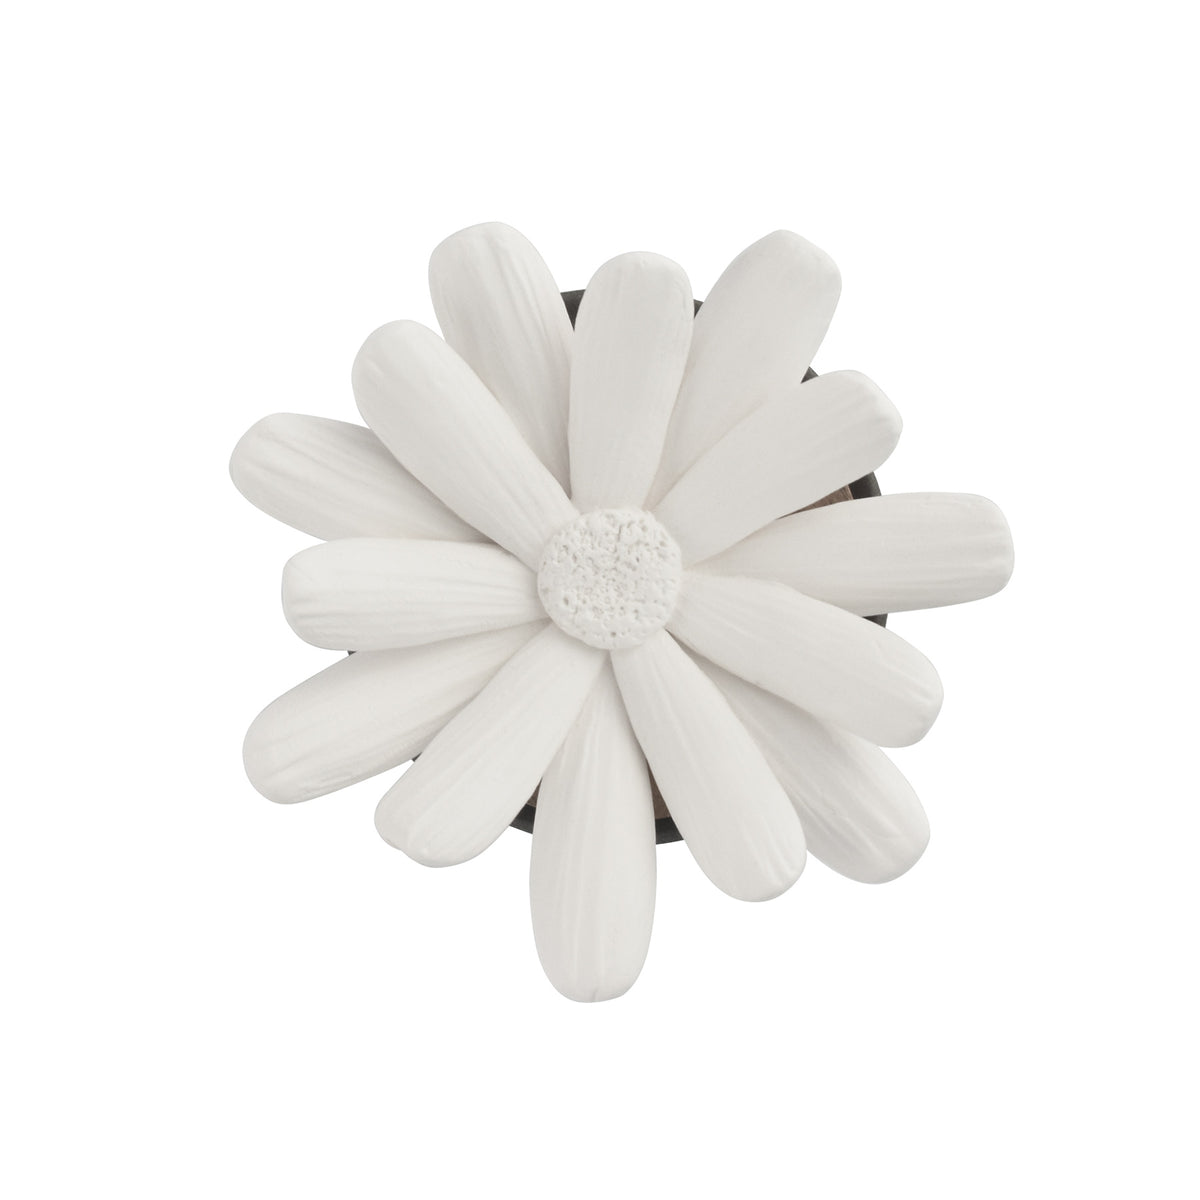 Daisy Bloomster Pot Clay Diffuser - HYSSES